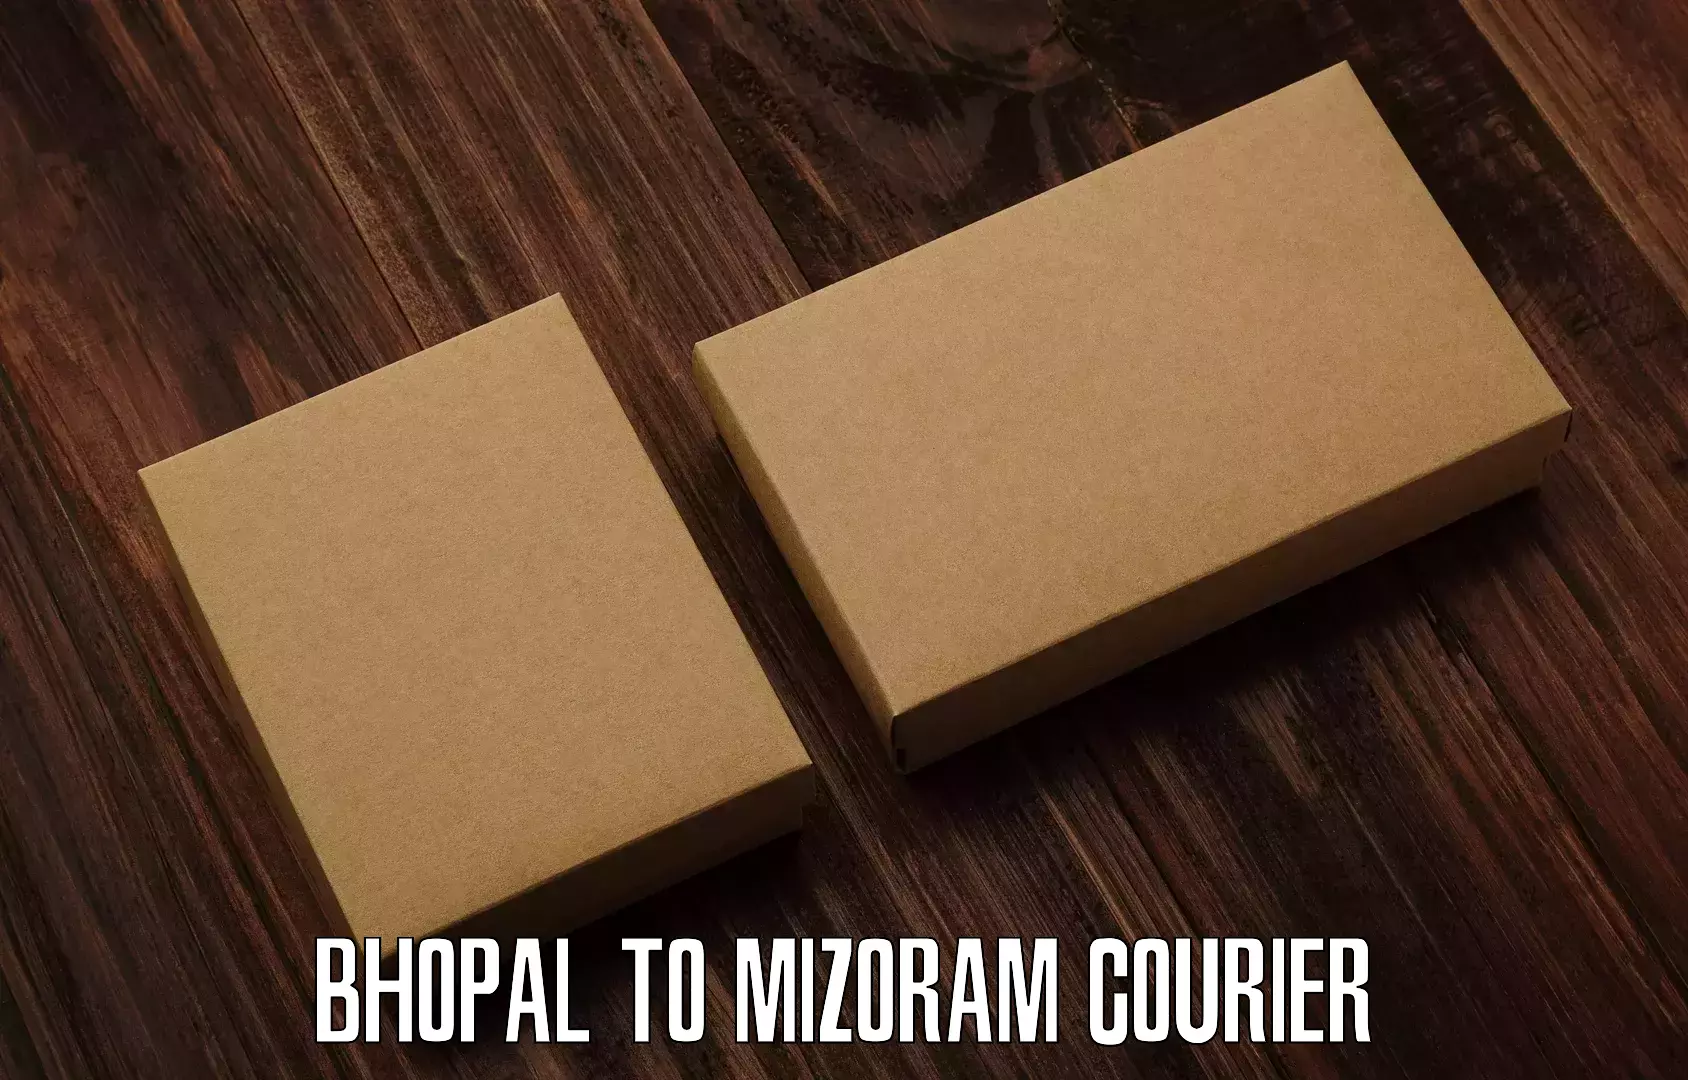 End-to-end delivery Bhopal to Mizoram